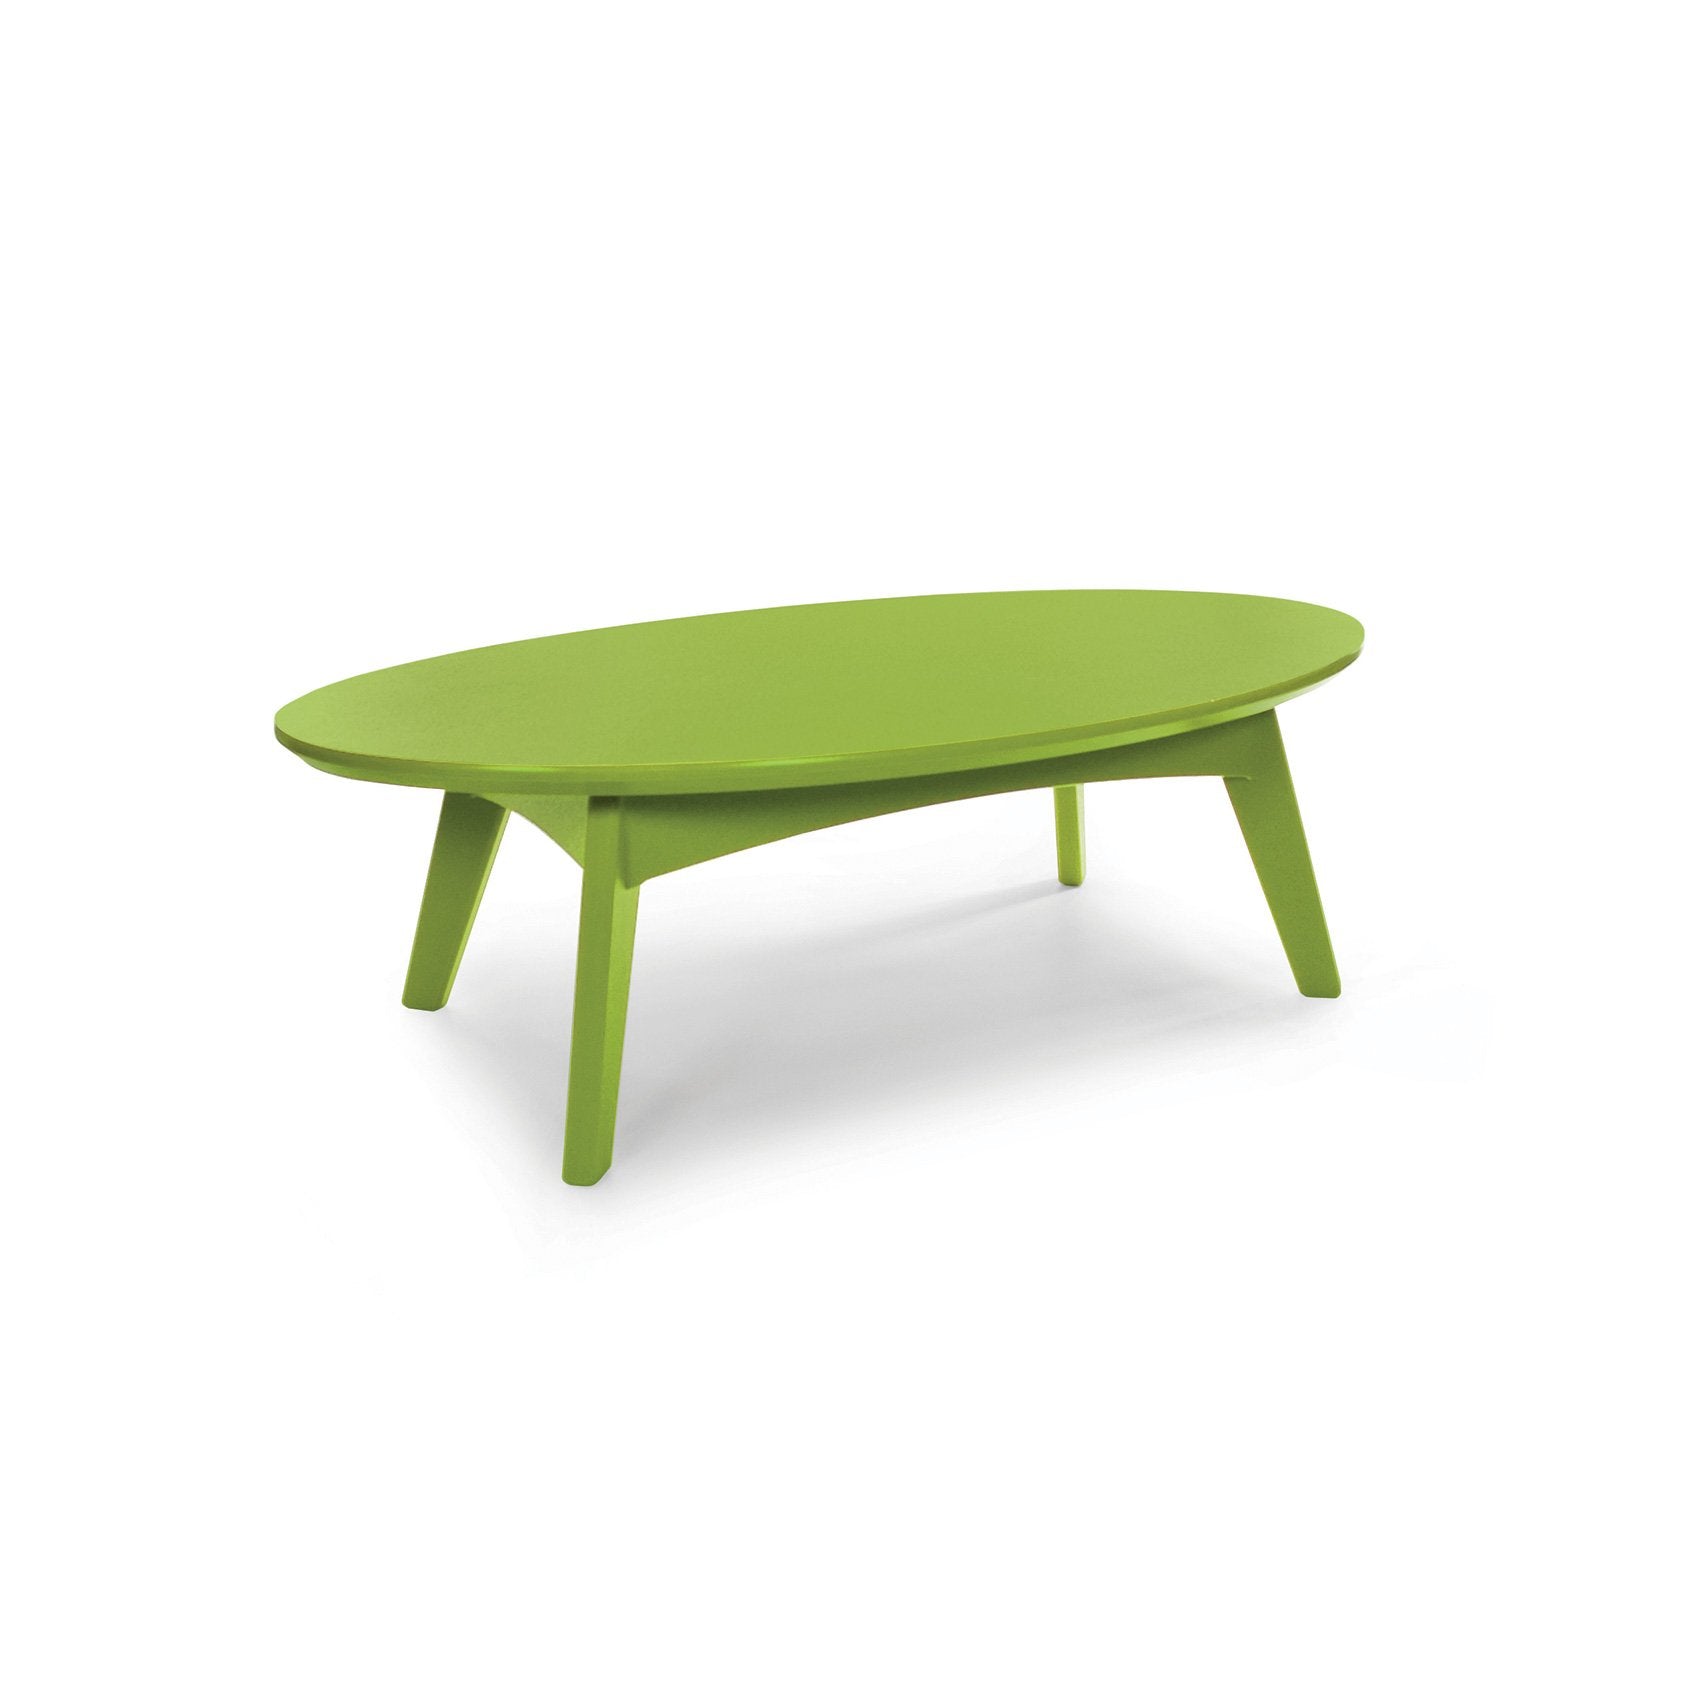 Satellite Cocktail Table (Oval)